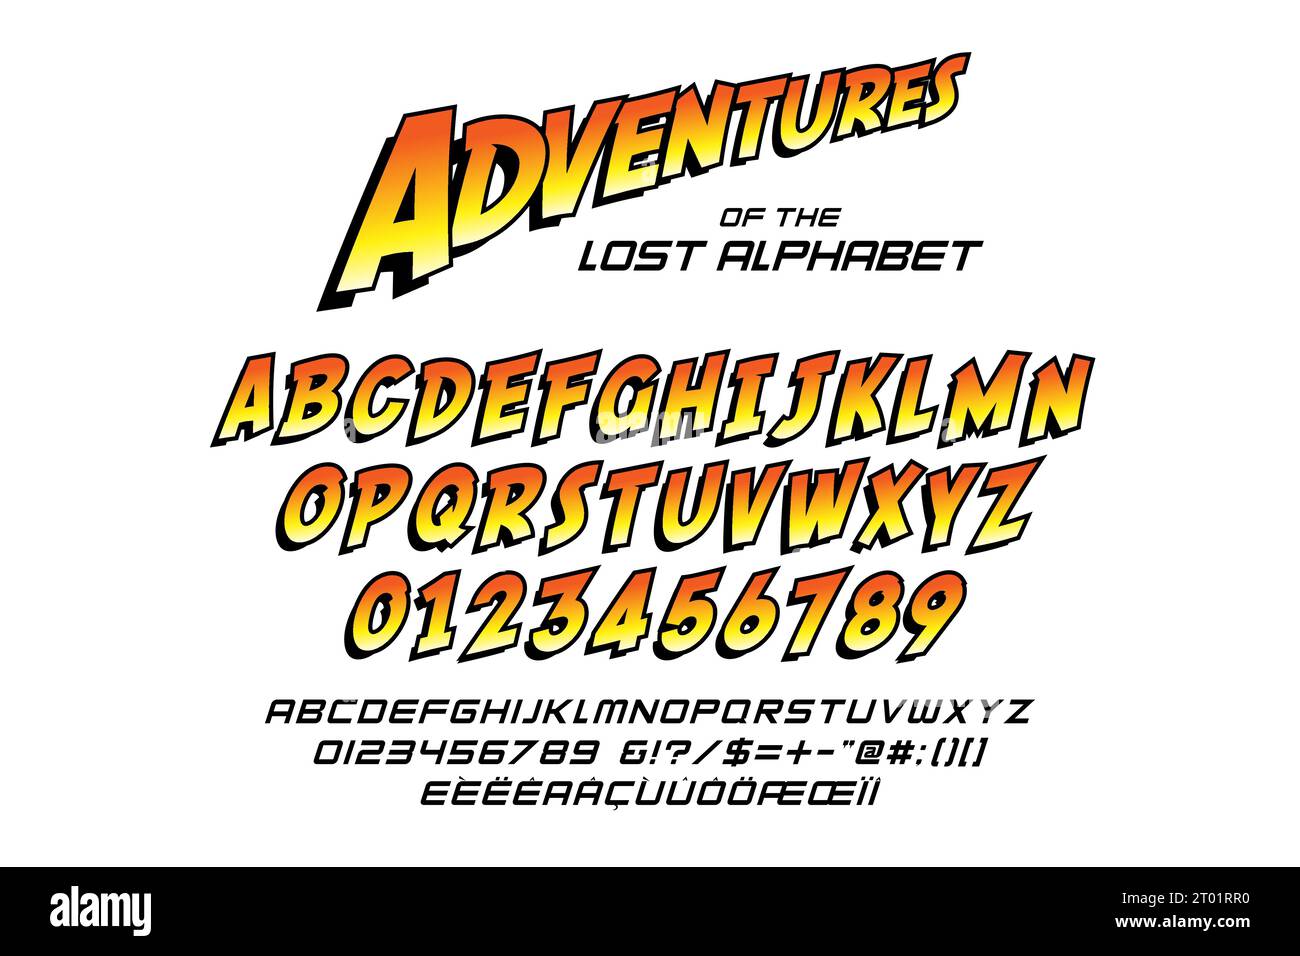 Adventurers have their own mythical alphabets Stock Vector